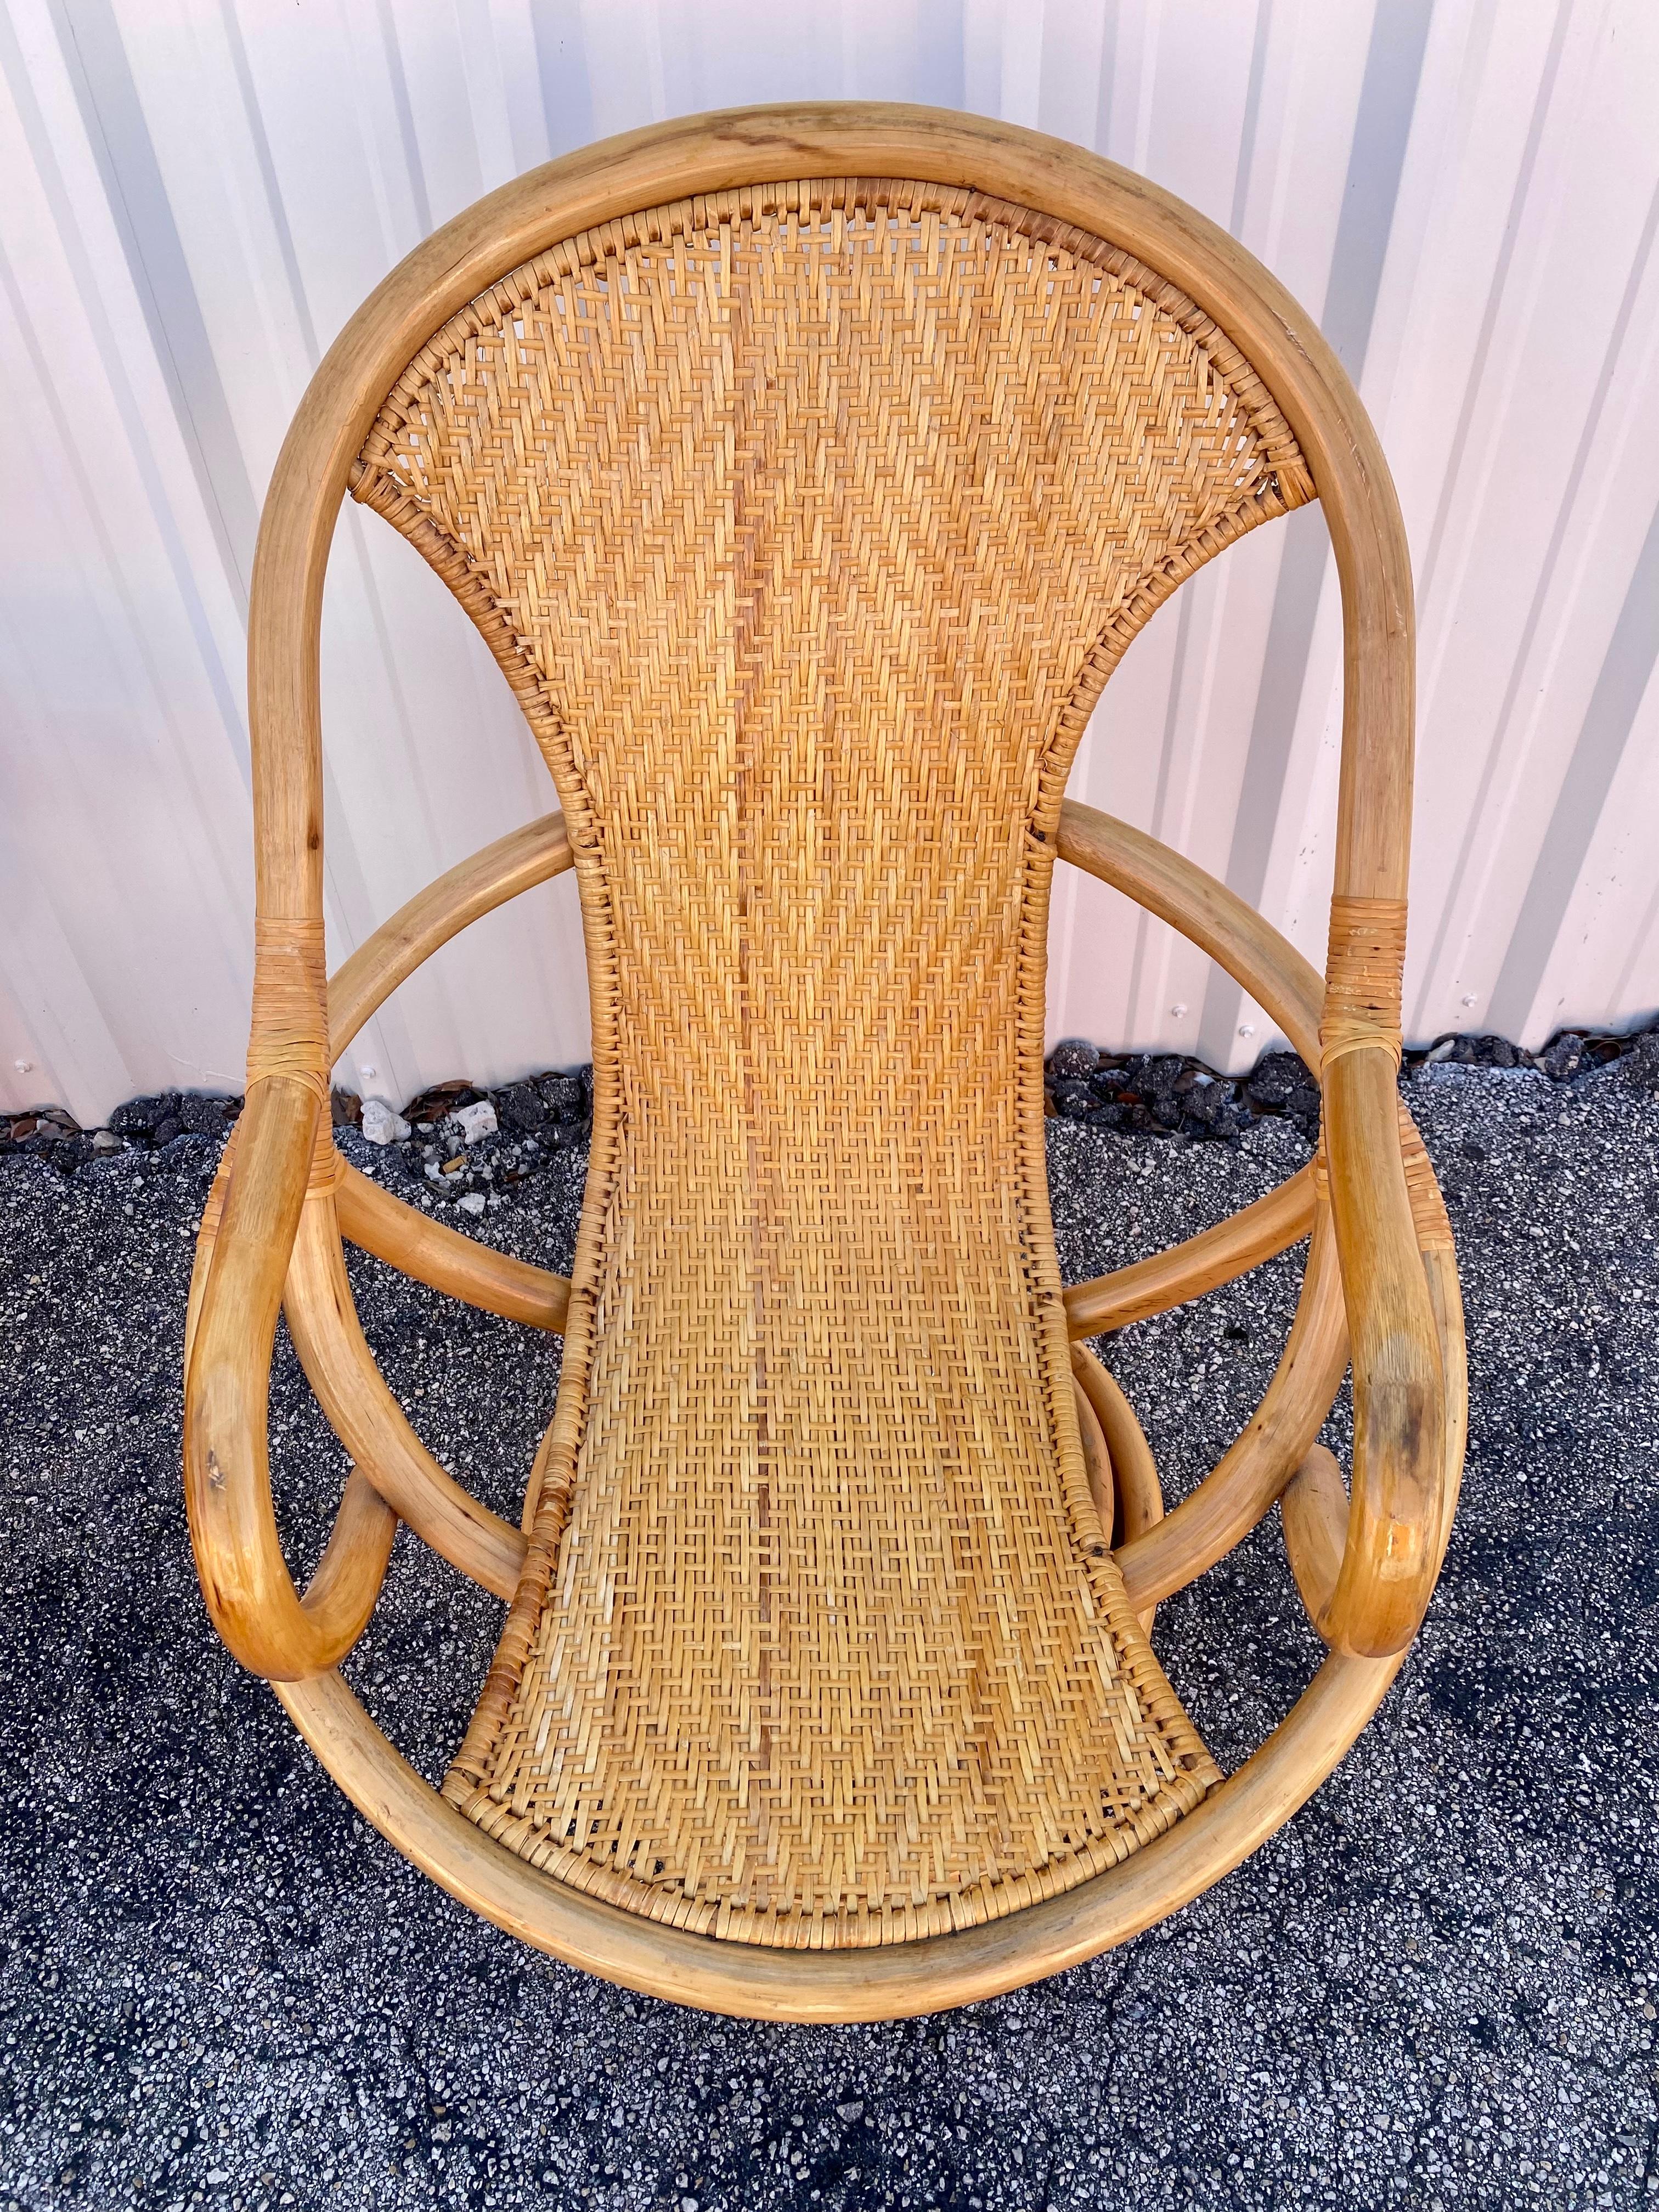 1980s Rattan Coastal Sculptural Swivel Chairs, set of 2 For Sale 4